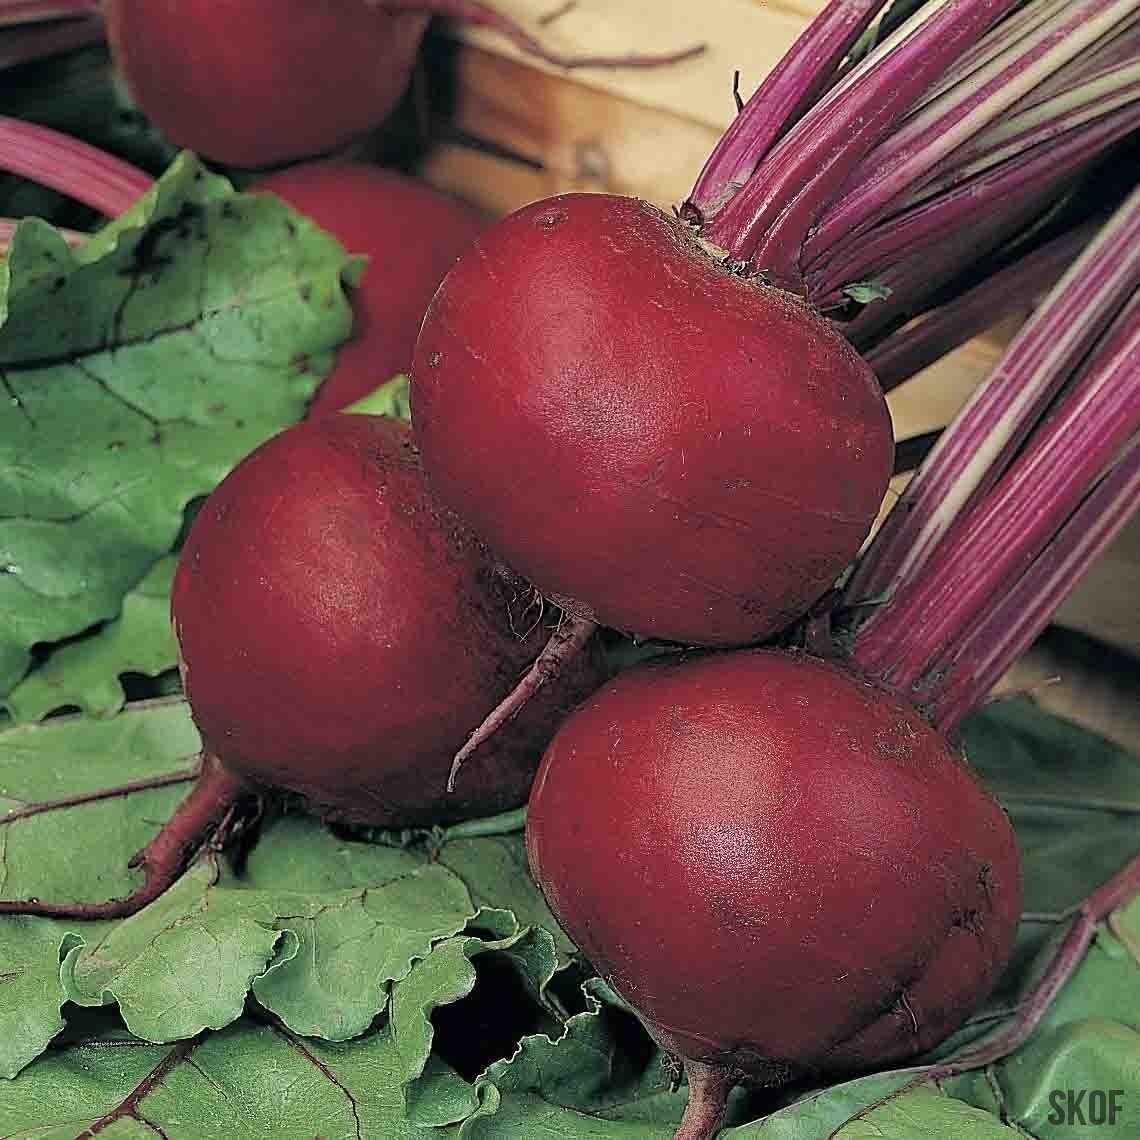 Detroit Dark Red Beetroot variety from Royal Seed